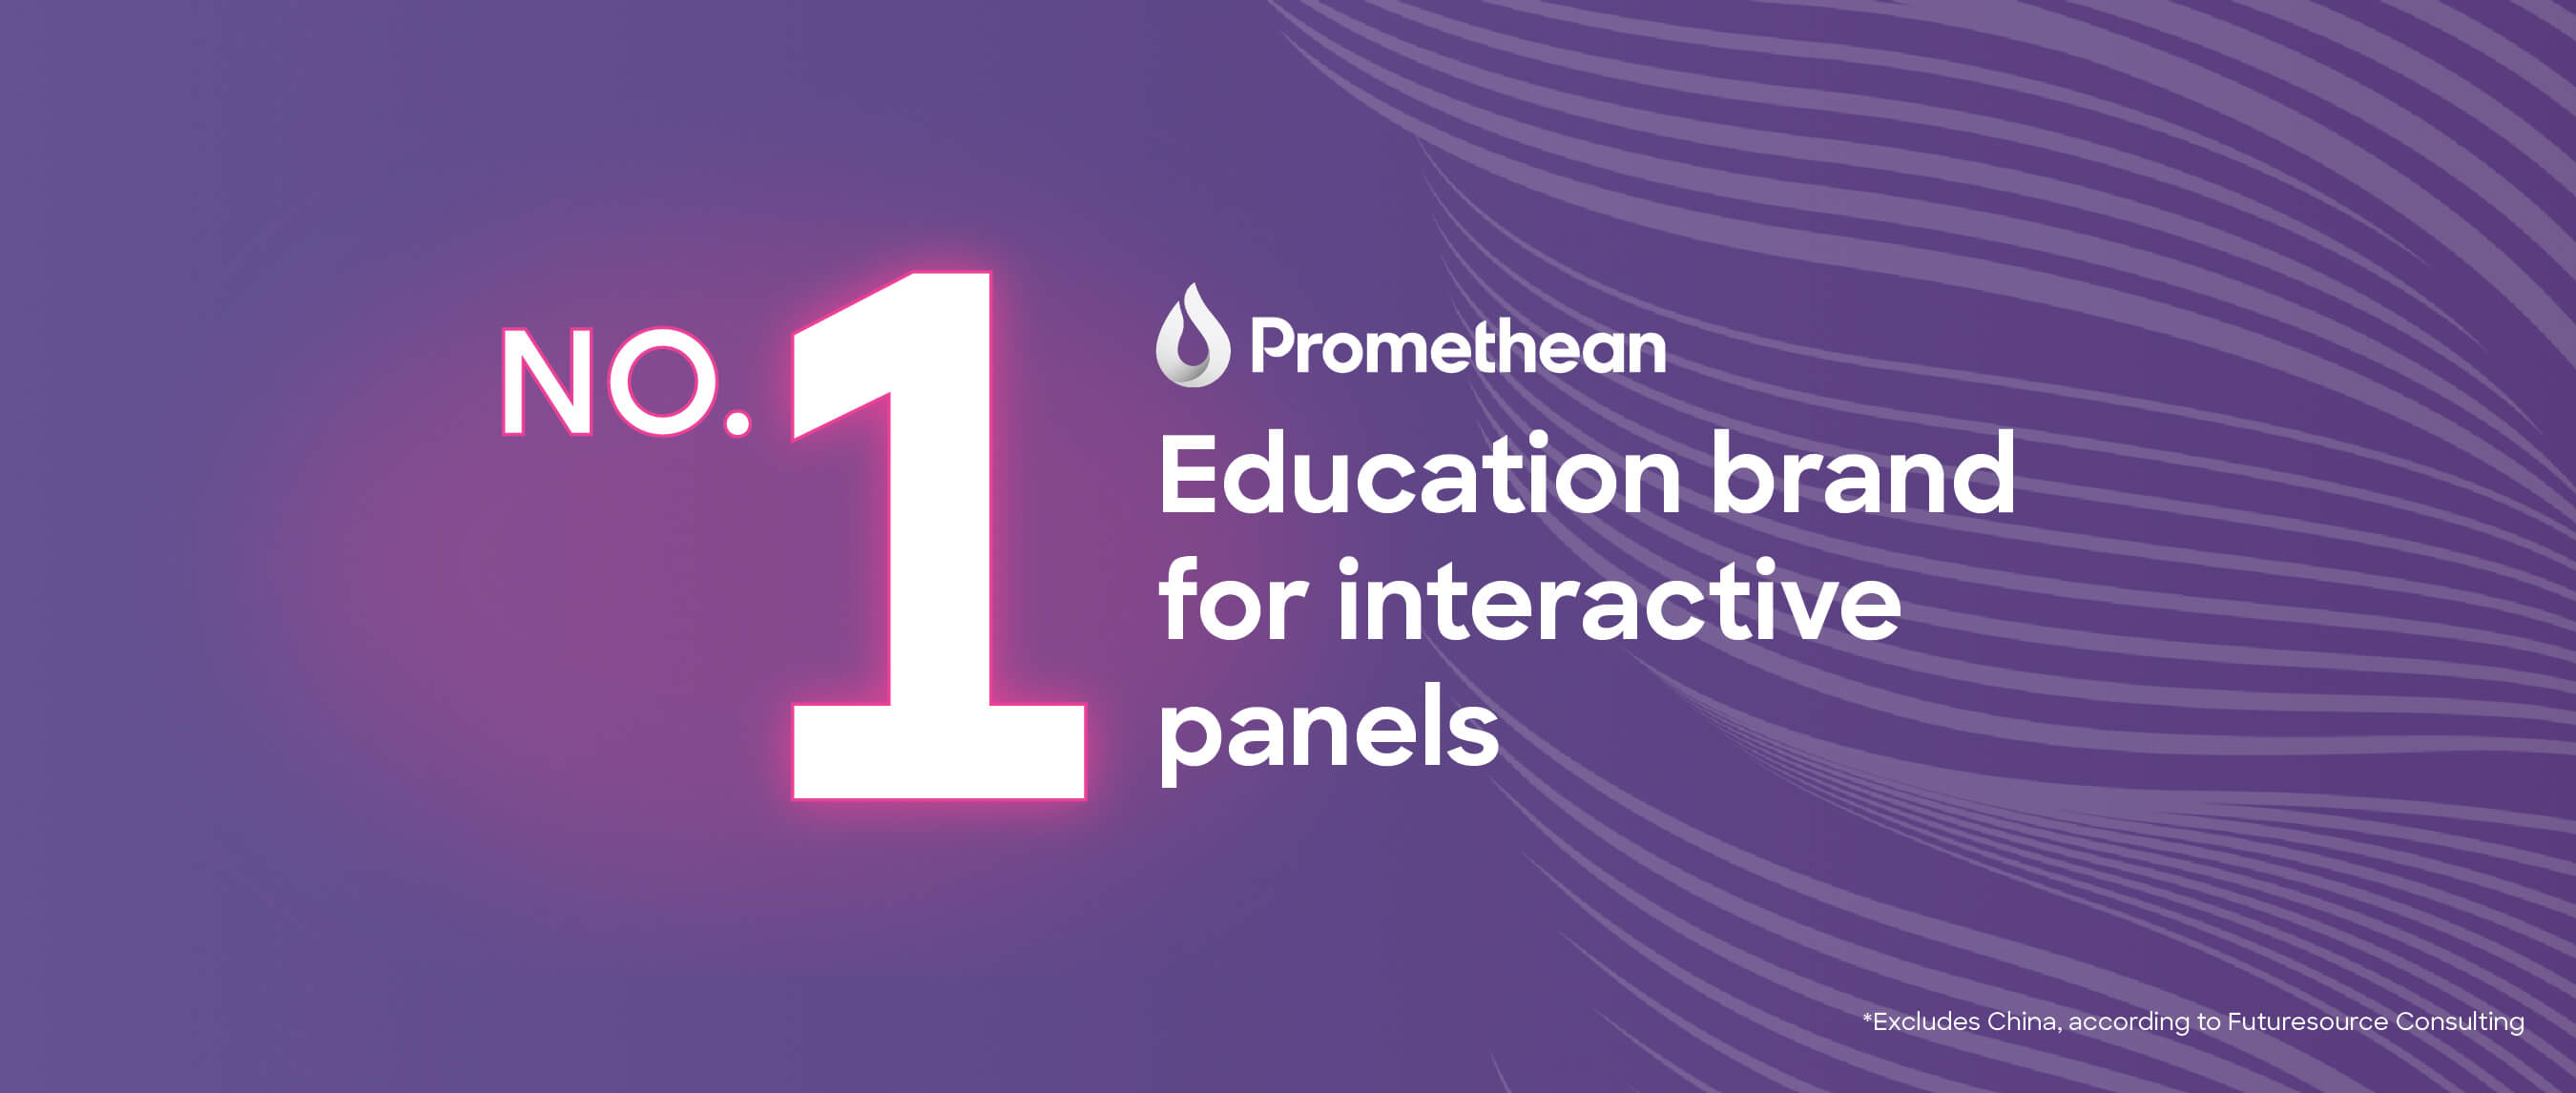 Promethean is top education brand for interactive displays